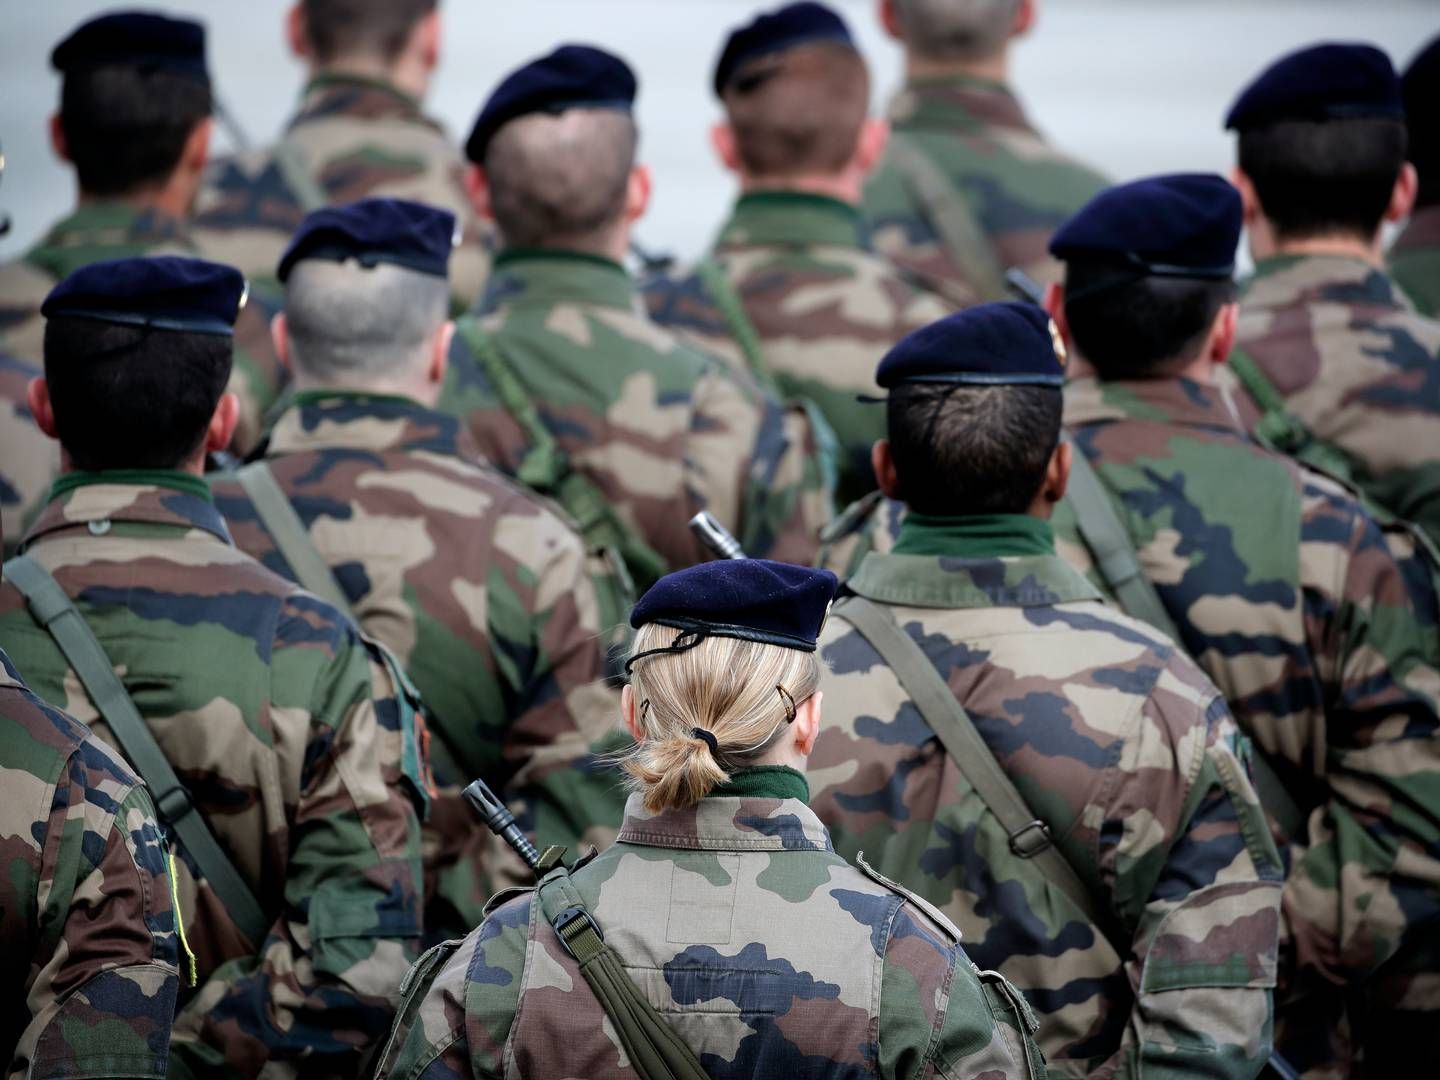 If the Danish Armed Forces terminates its criticized agreement with Scan Global, there is a risk that the logistics company will file a lawsuit against the Danish Ministry of Defence Acquisition and Logistics Organisation (DALO), according to an internal document sent to the ministry of defense. | Foto: Jens Dresling/Politiken/Ritzau Scanpix